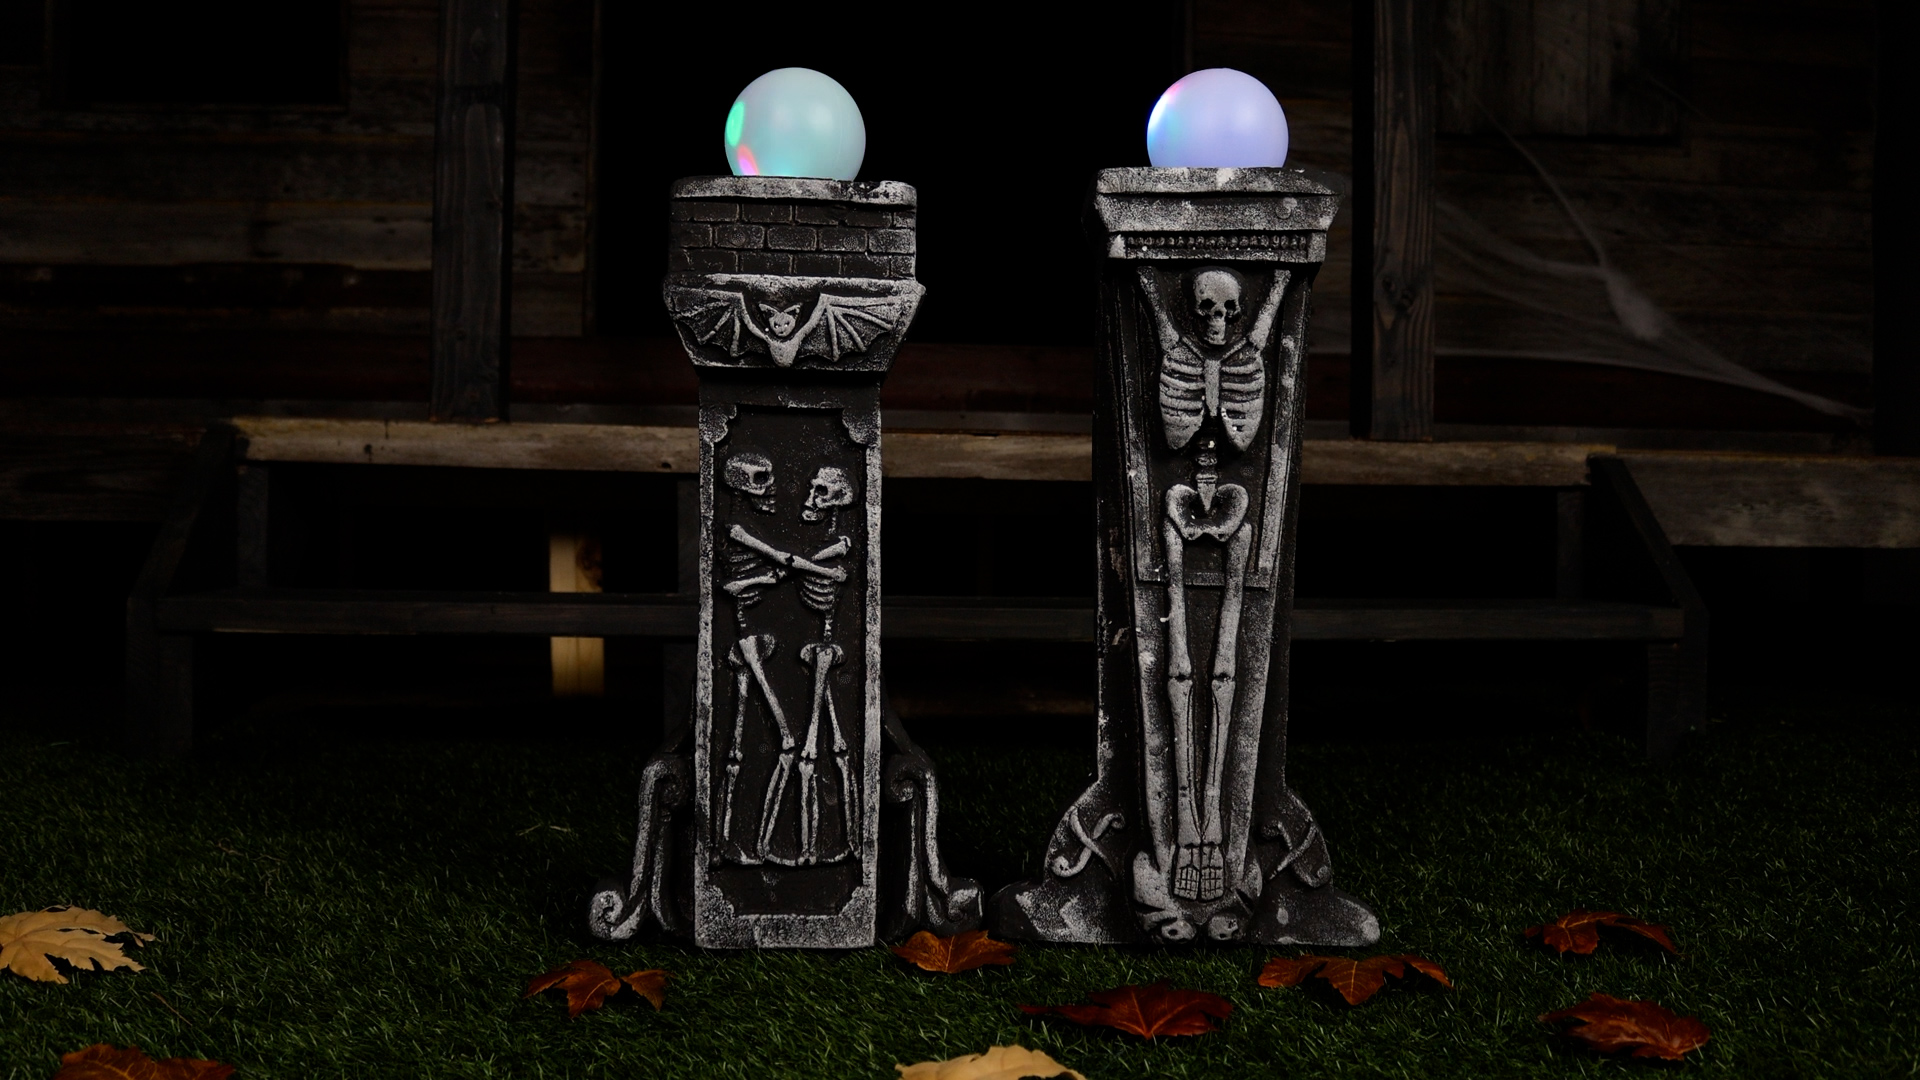 FY74670_Pair of 24'' Pillars with Light Up Globes Decoration